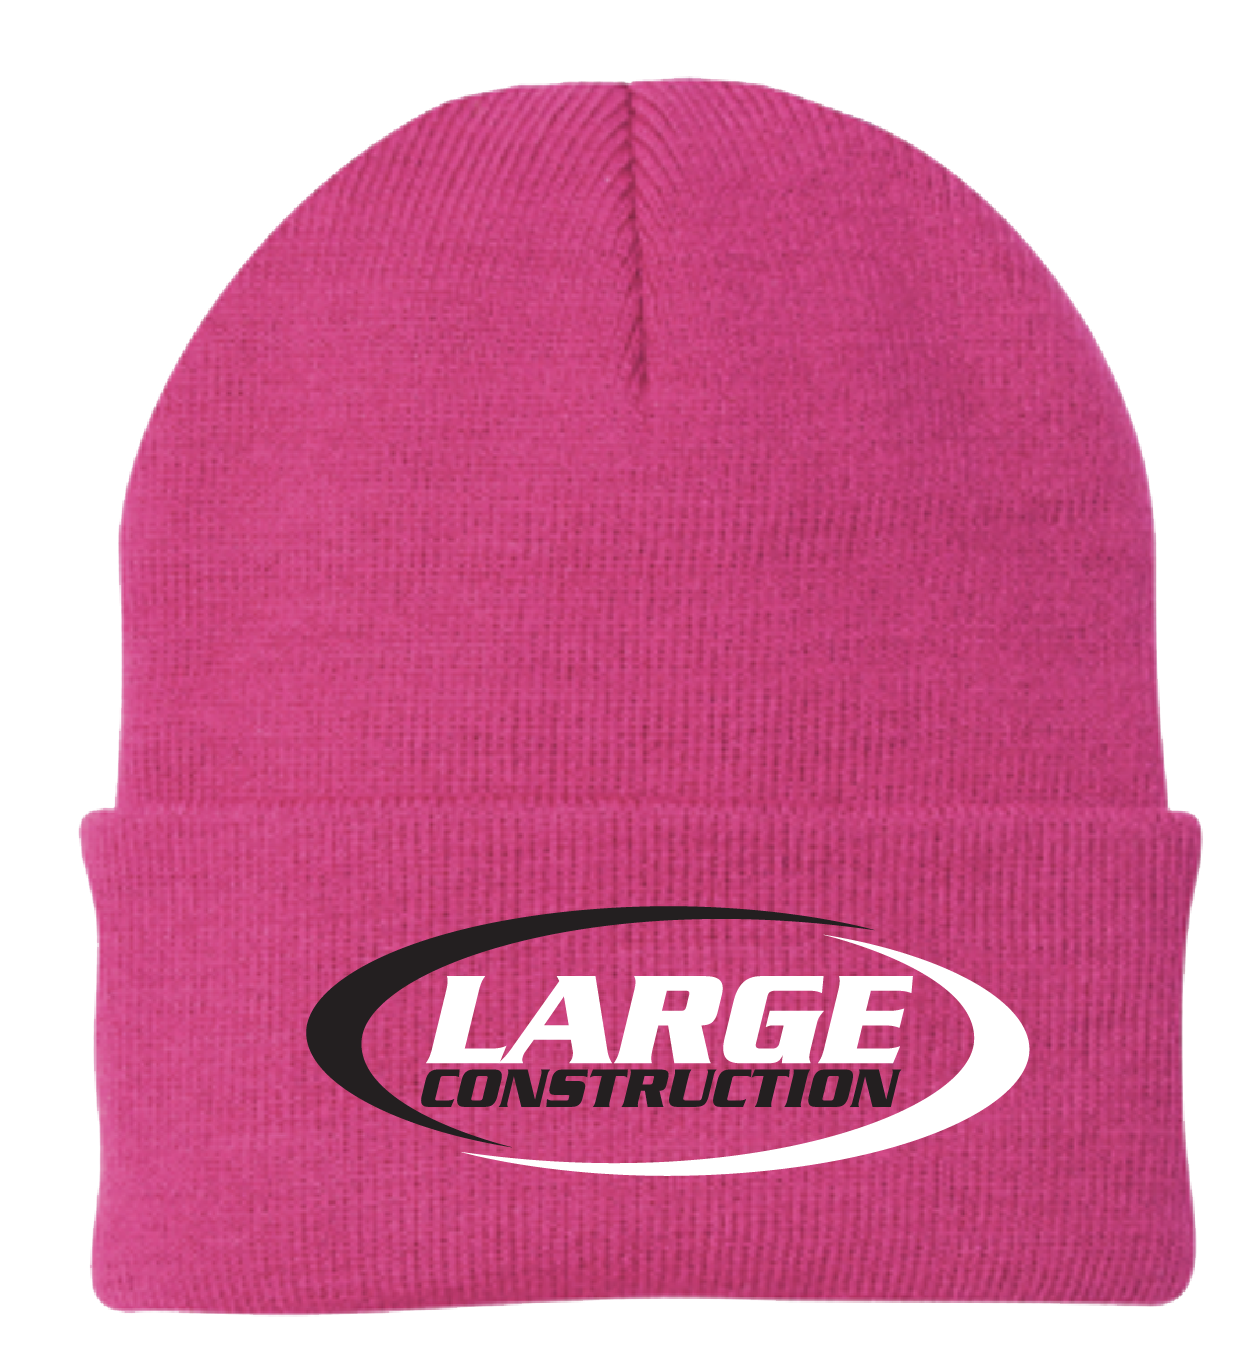 Large Construction Beanies - Neon Hot Pink